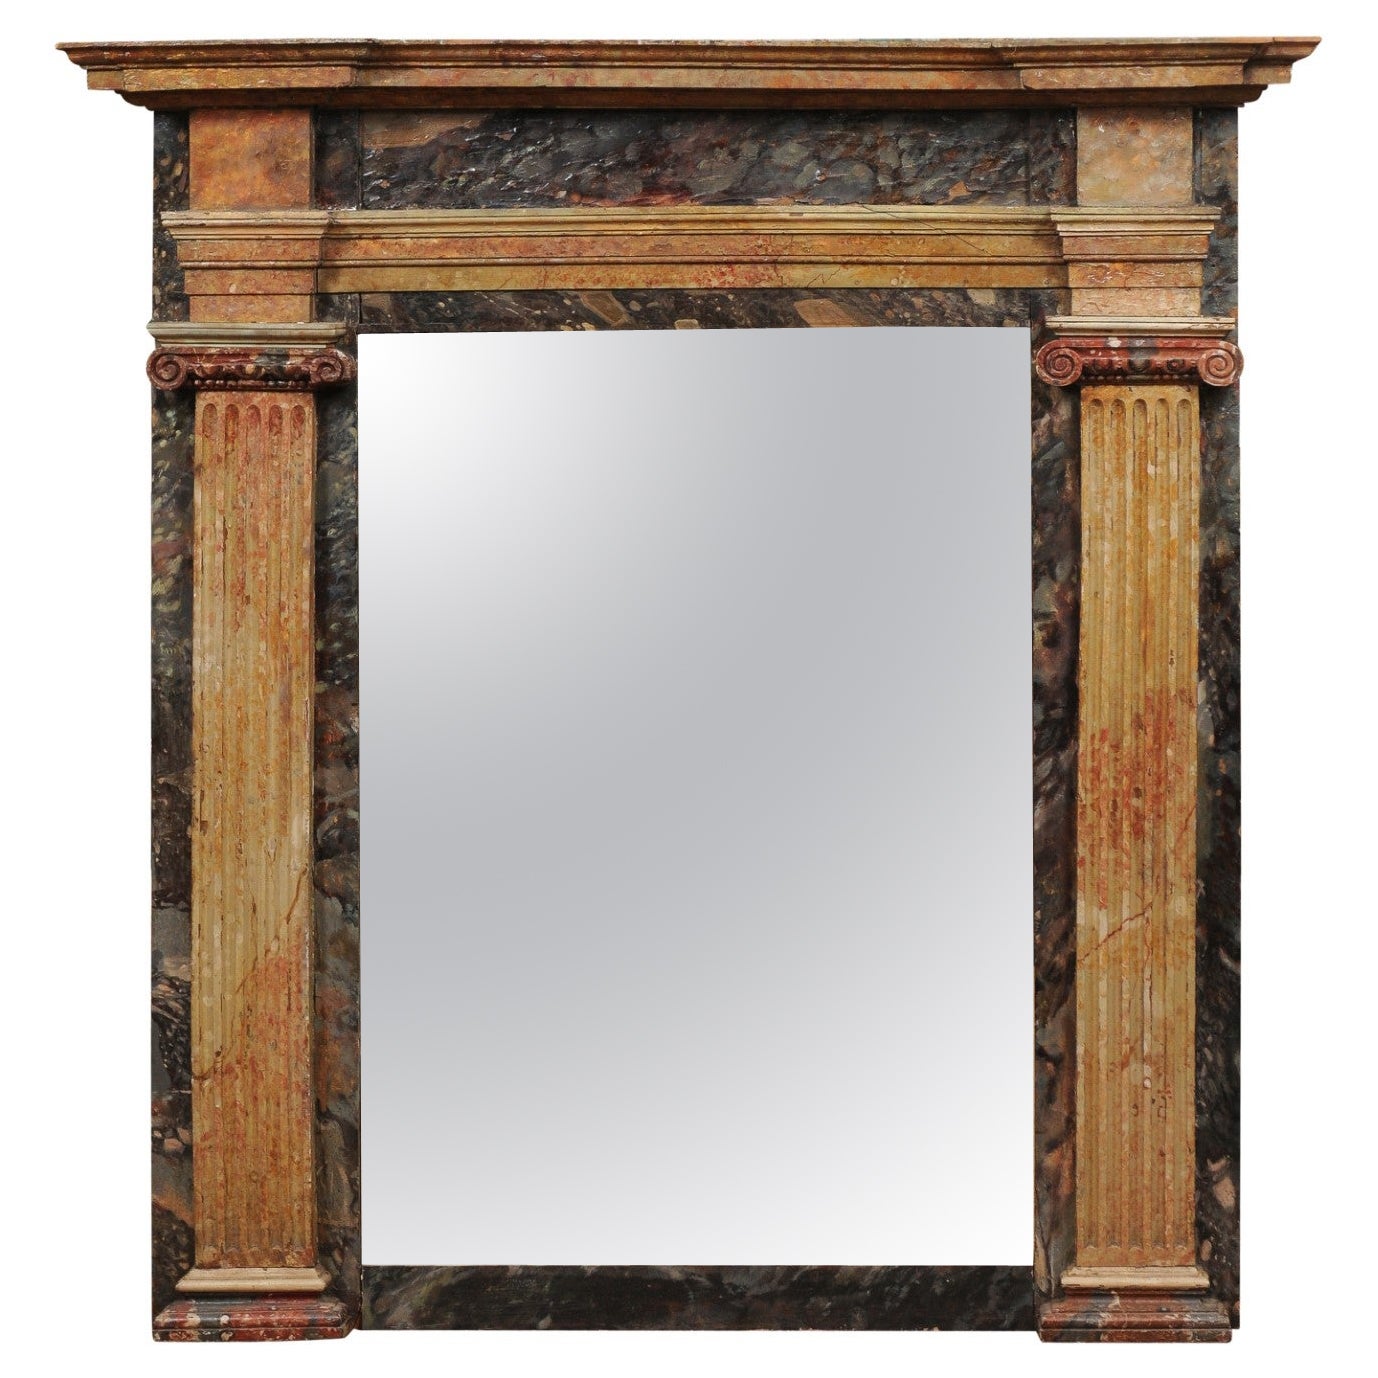 19th Century Italian Painted Mirror with Faux Marbleized Finish & Column Detail